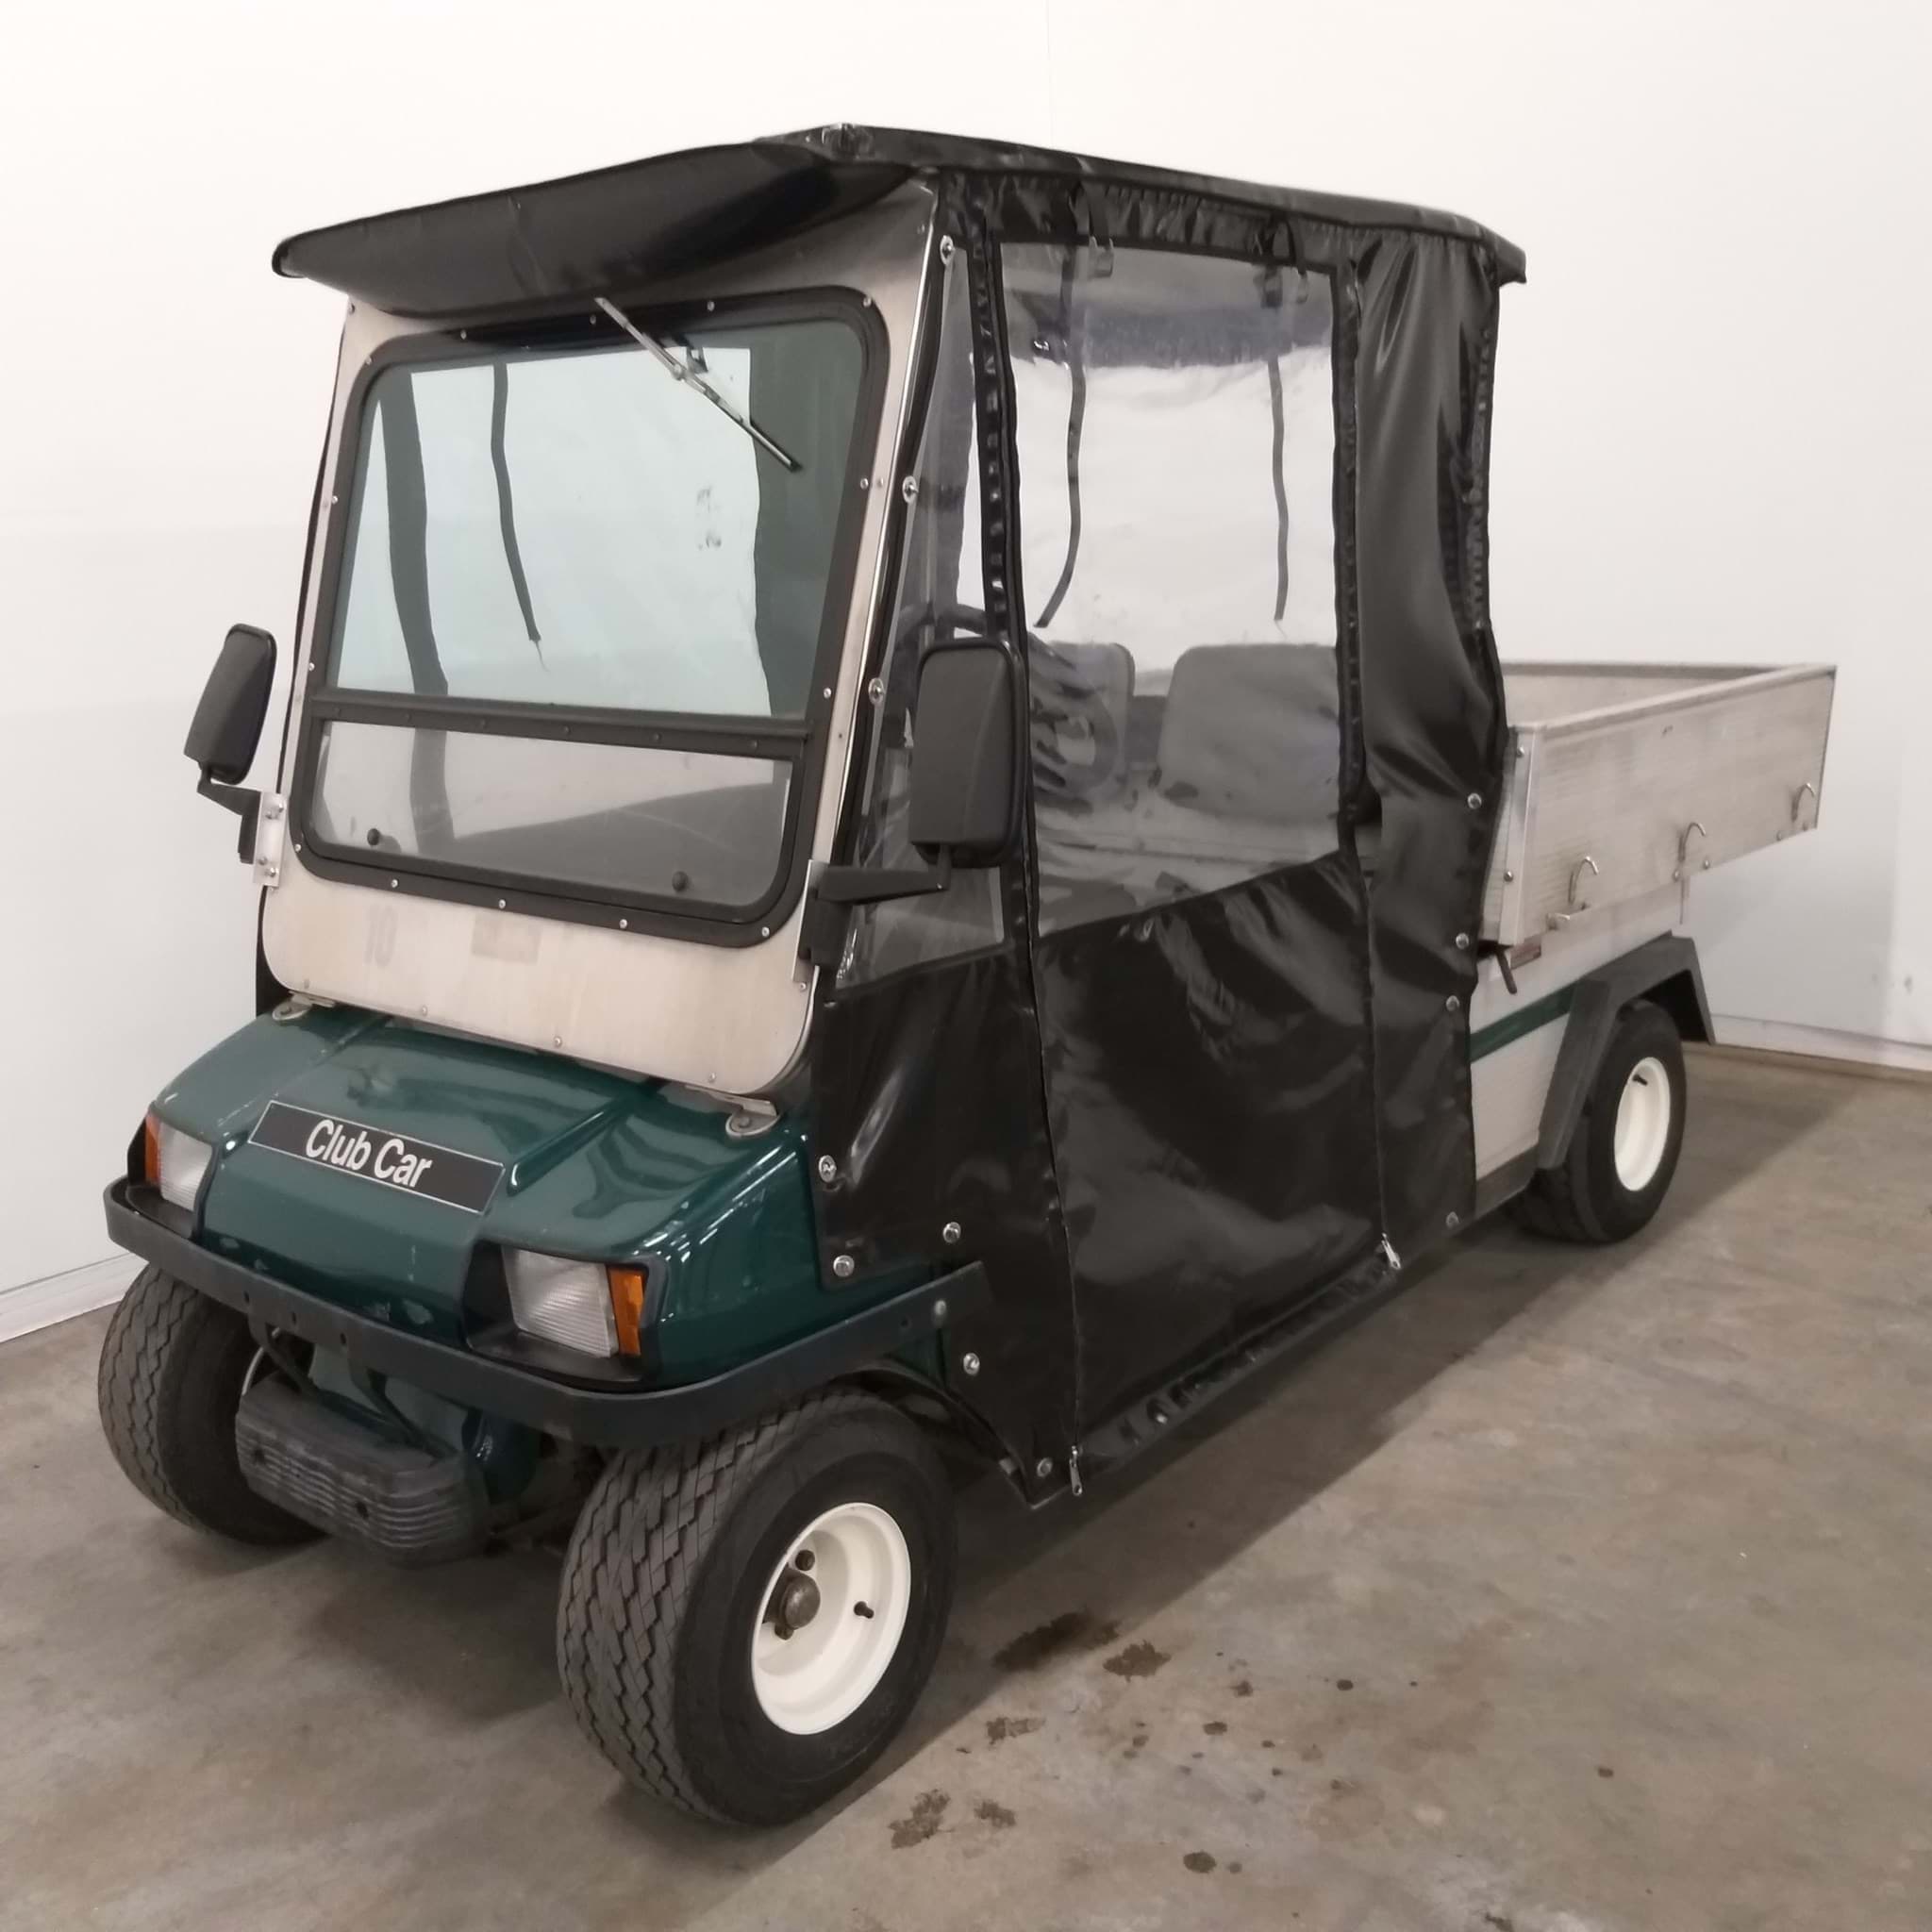 Picture of Trade - 2001 - Electric - Club Car - Carryall 2 - Open Cargobox - Green